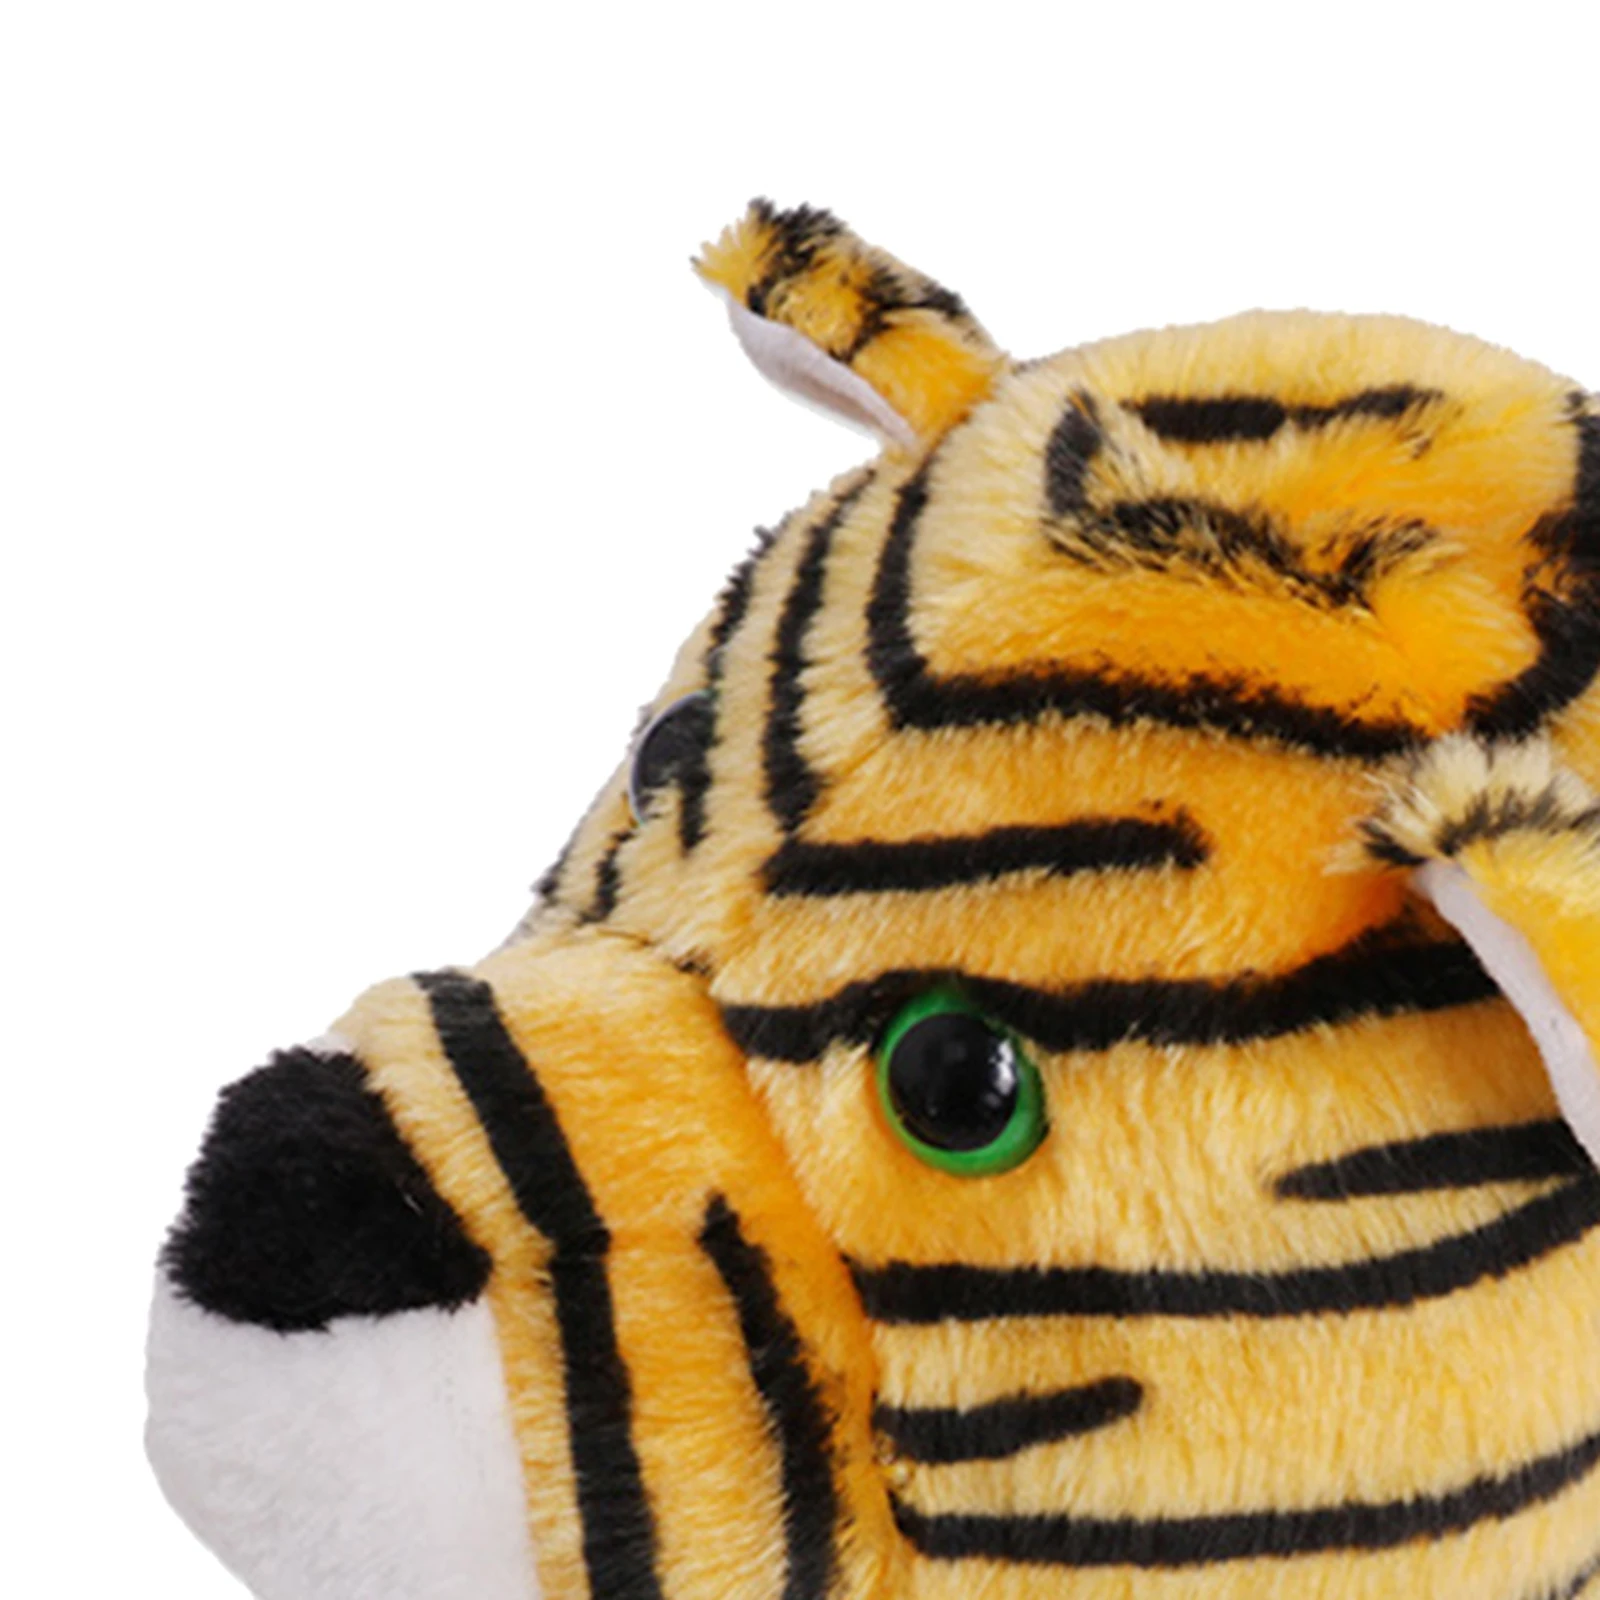 

No 1 Golf Club Wood Driver Head Covers Novelty Tiger Headcover Golfer Gift